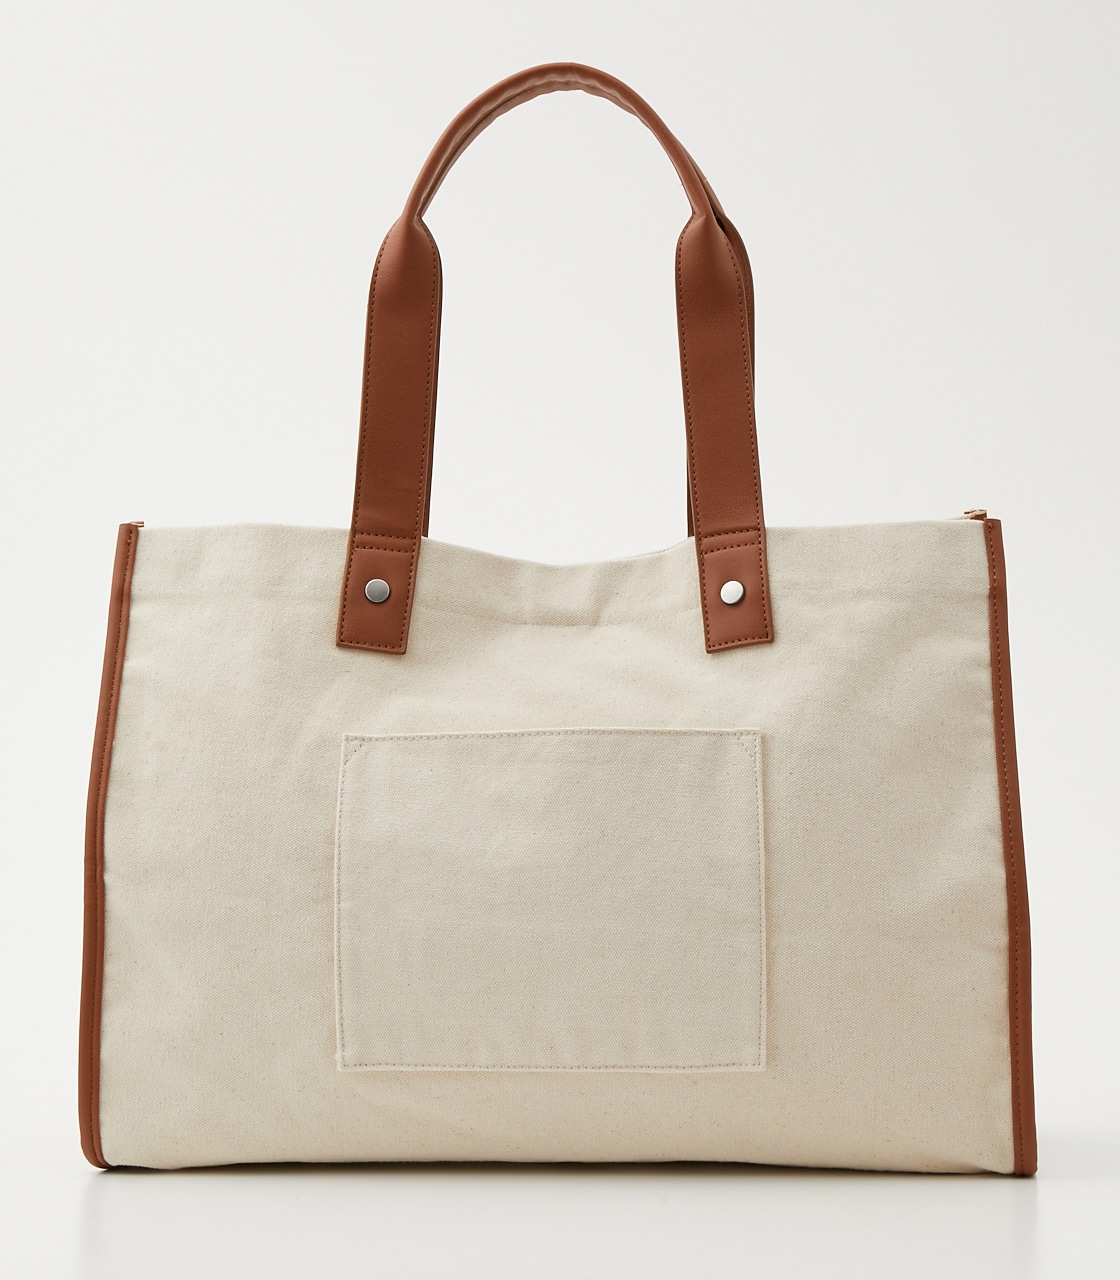 LINEN LIKE BIG TOTE BAG/リネンライクビッグトートバッグ 詳細画像 柄CAM 1